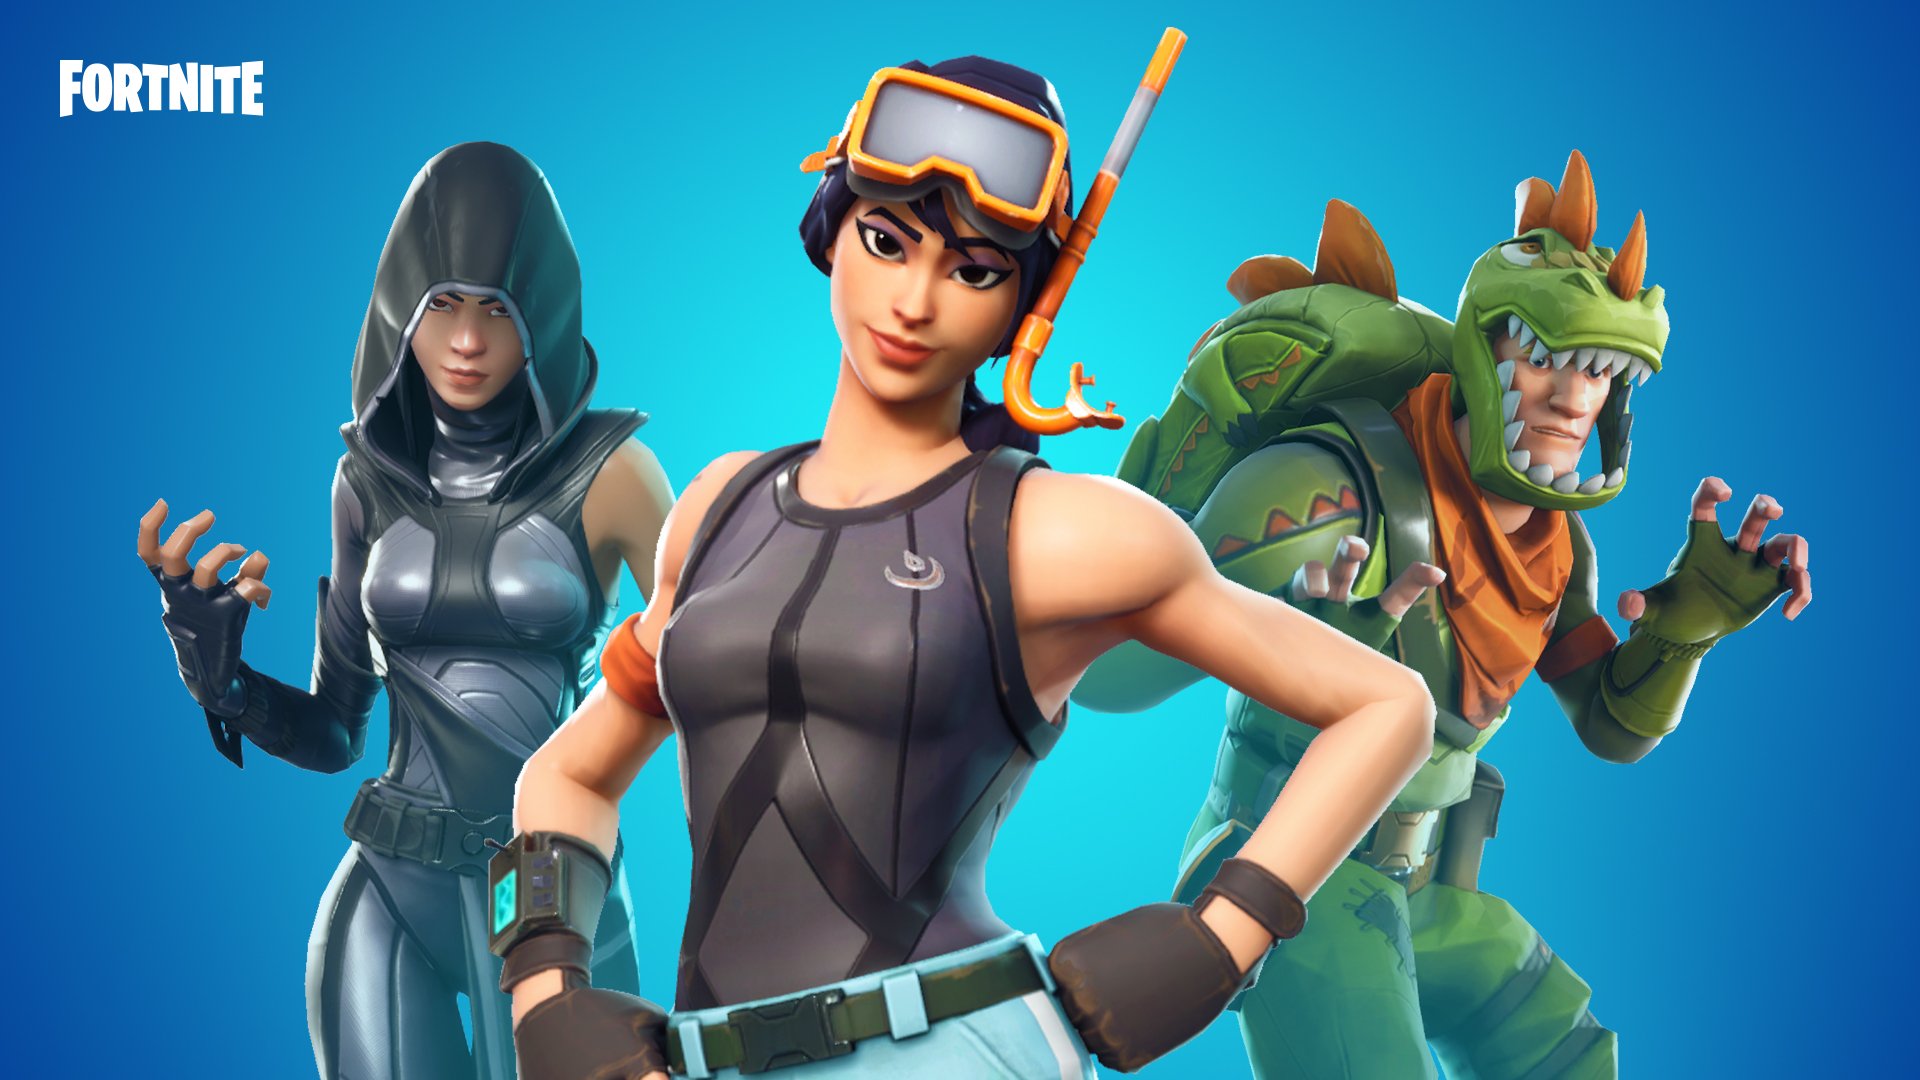 Fortnite Twitch Streamer HydraSZN Accused of Making Inappropriate Comments